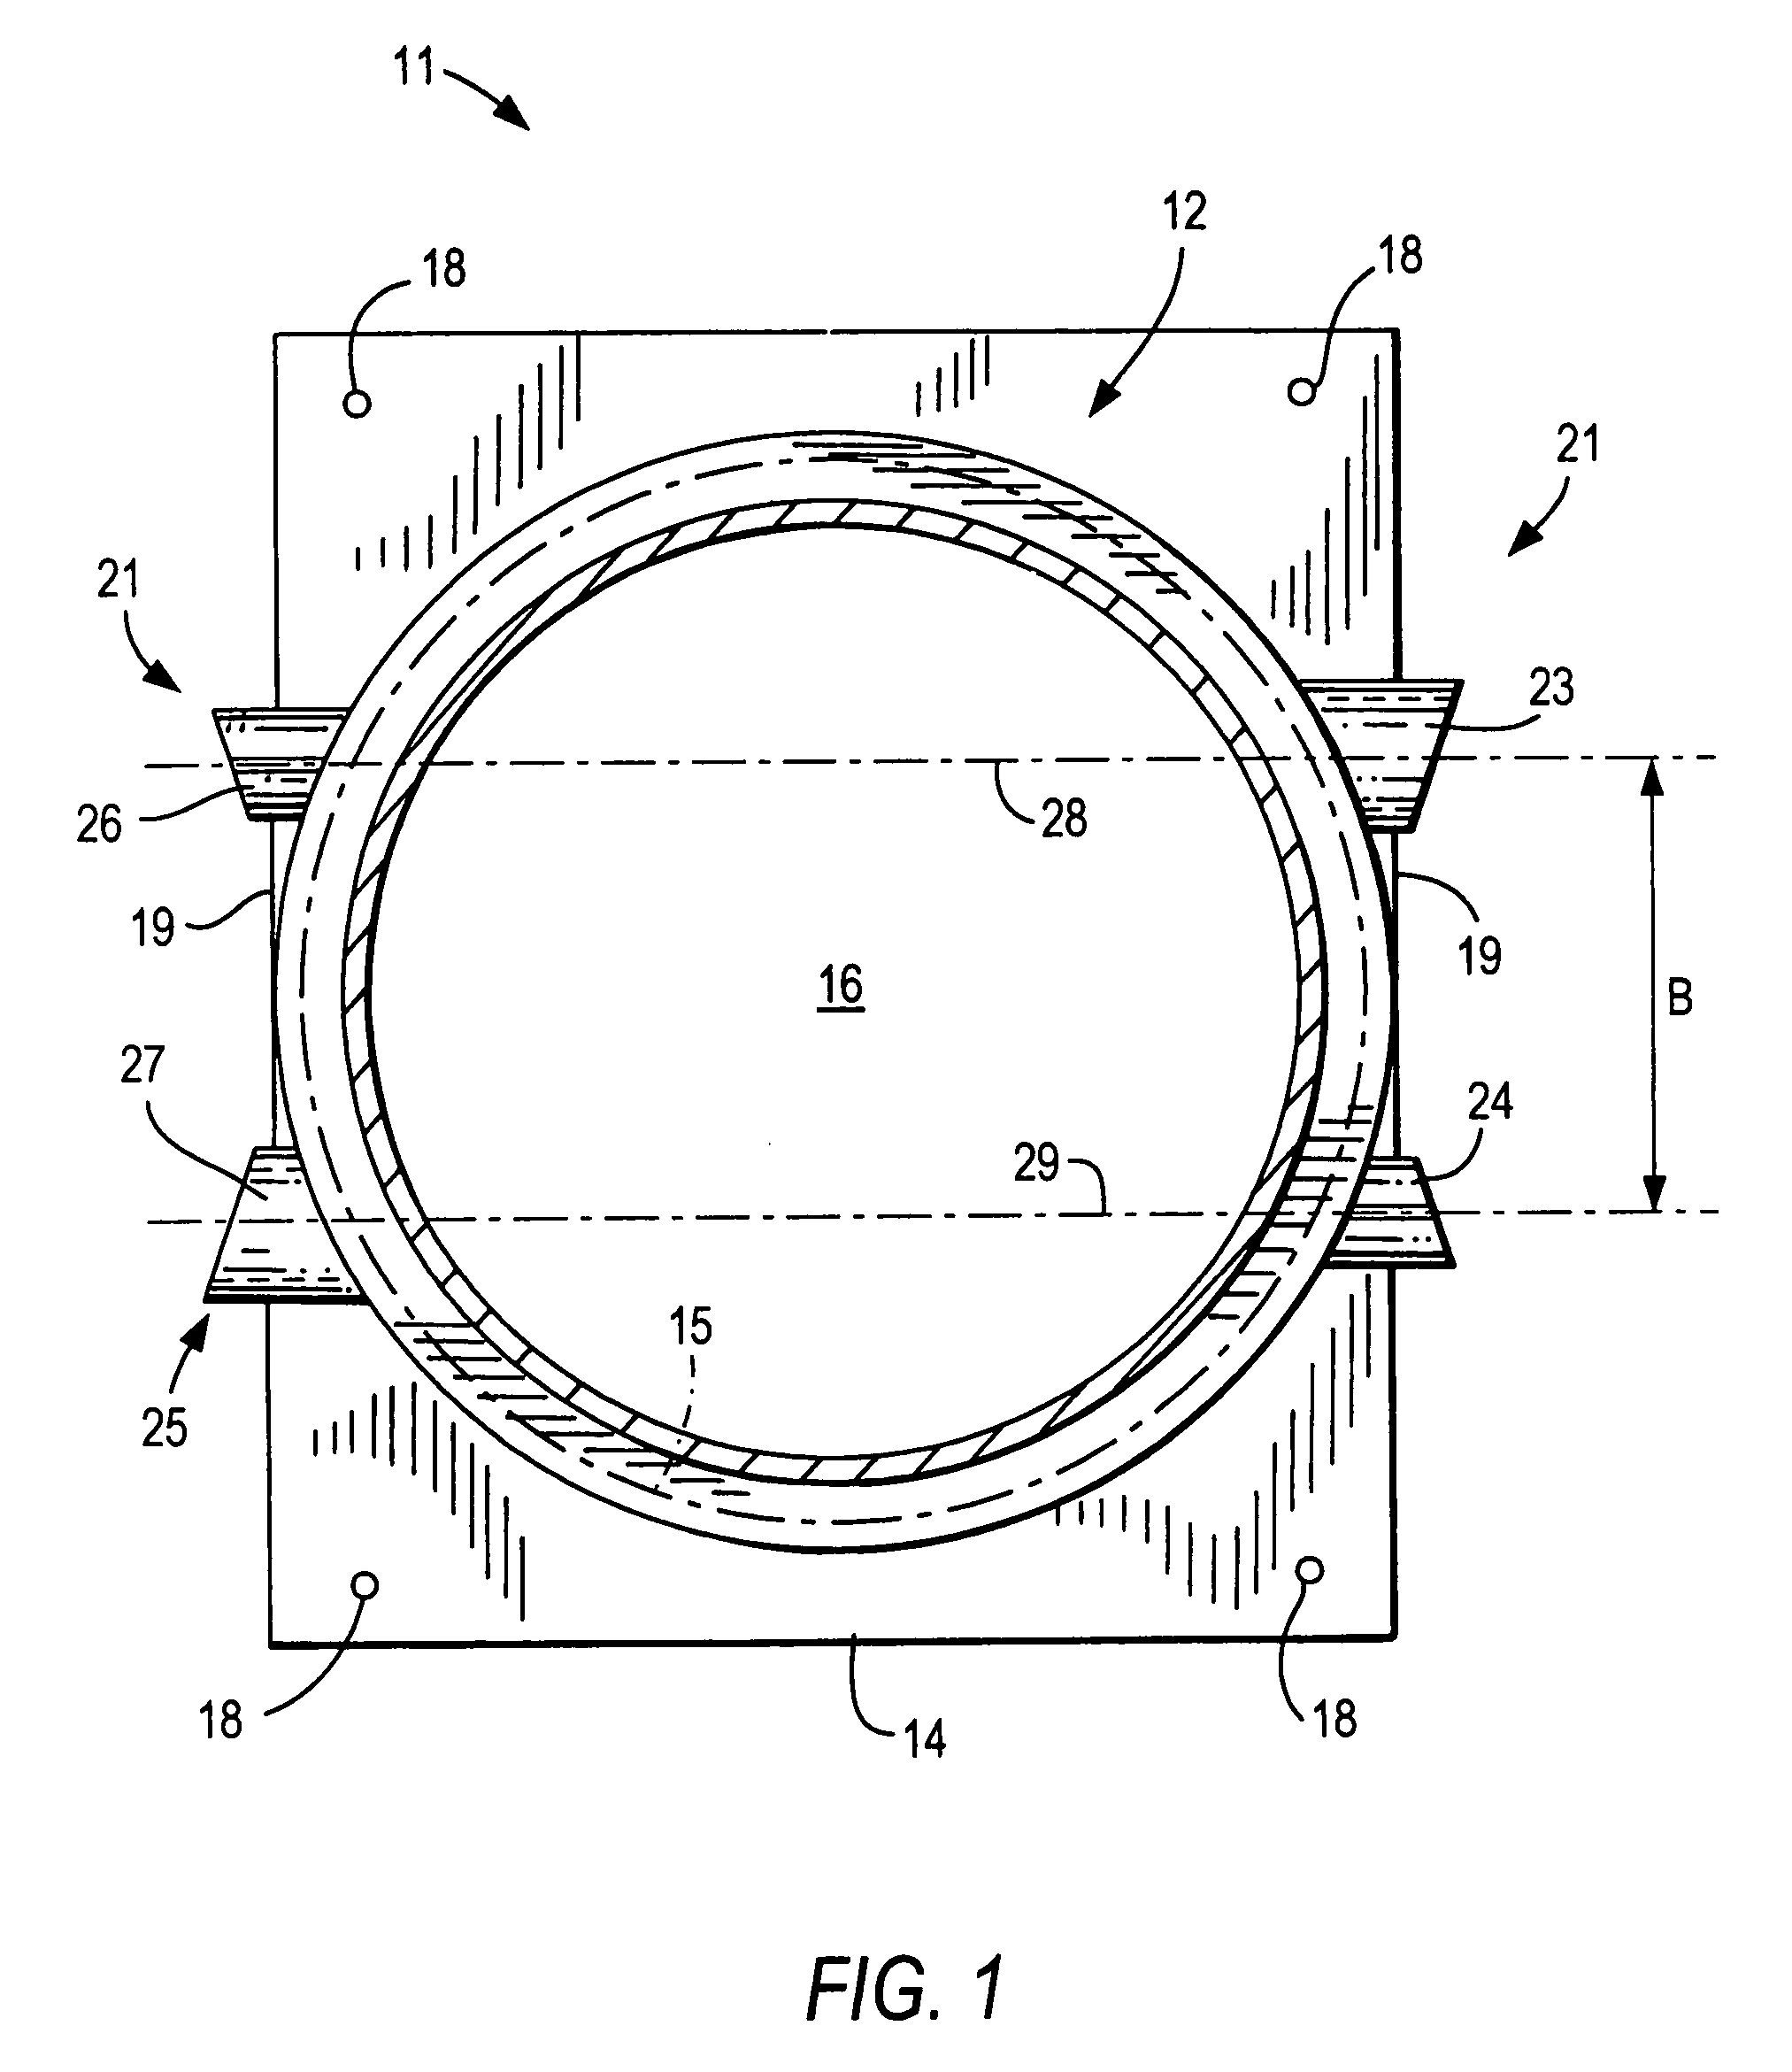 Embeddable device for passing conduits through a constructional component